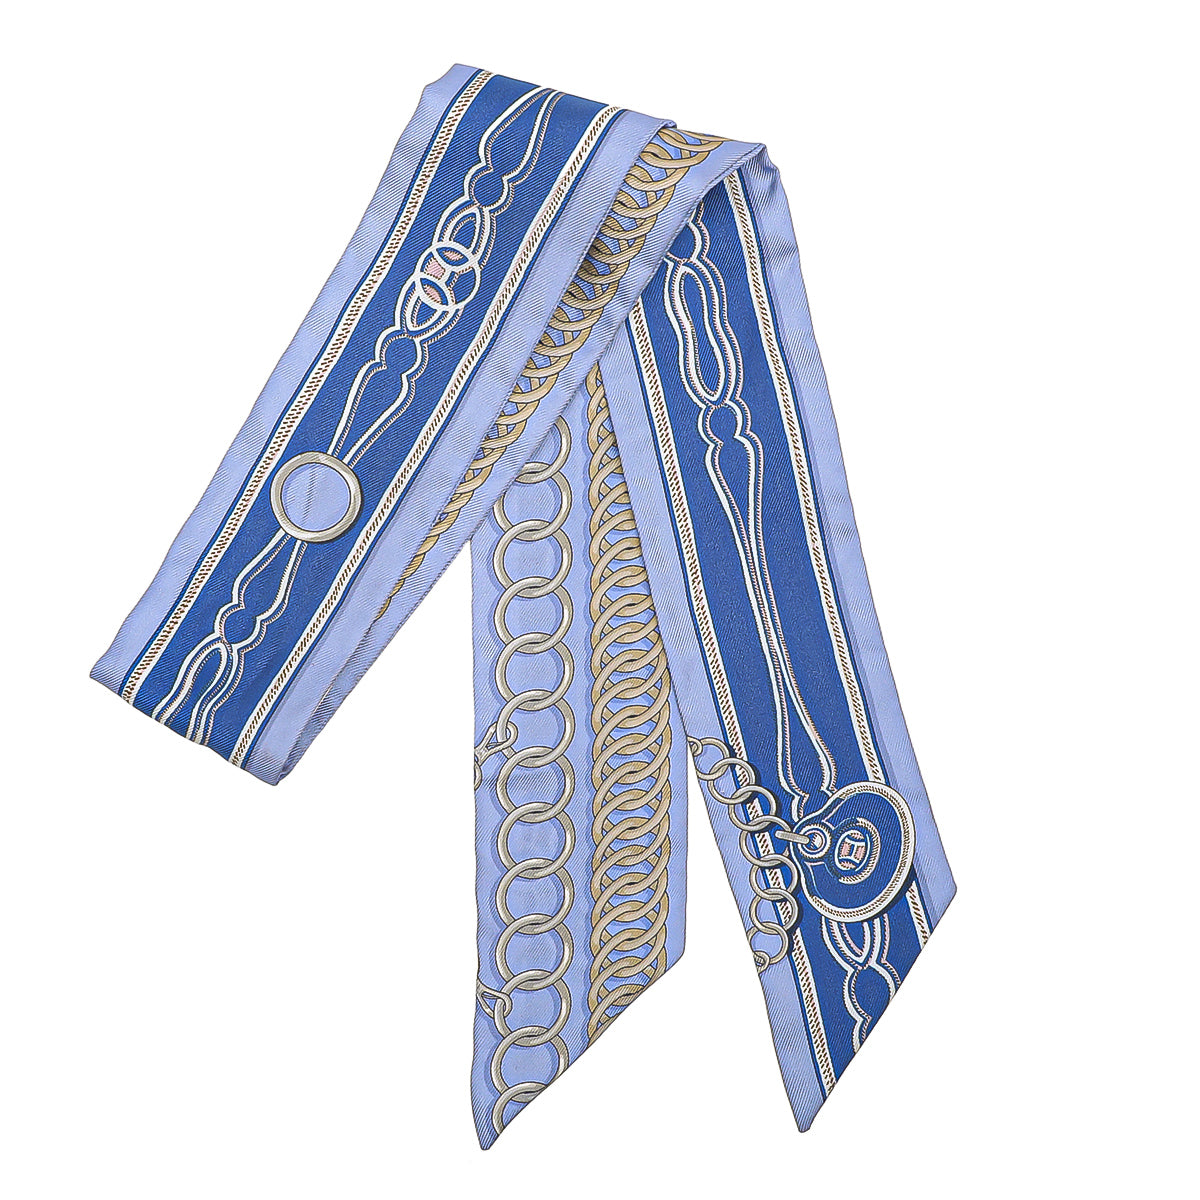 Hermes Blue Chain Print Twilly Scarf